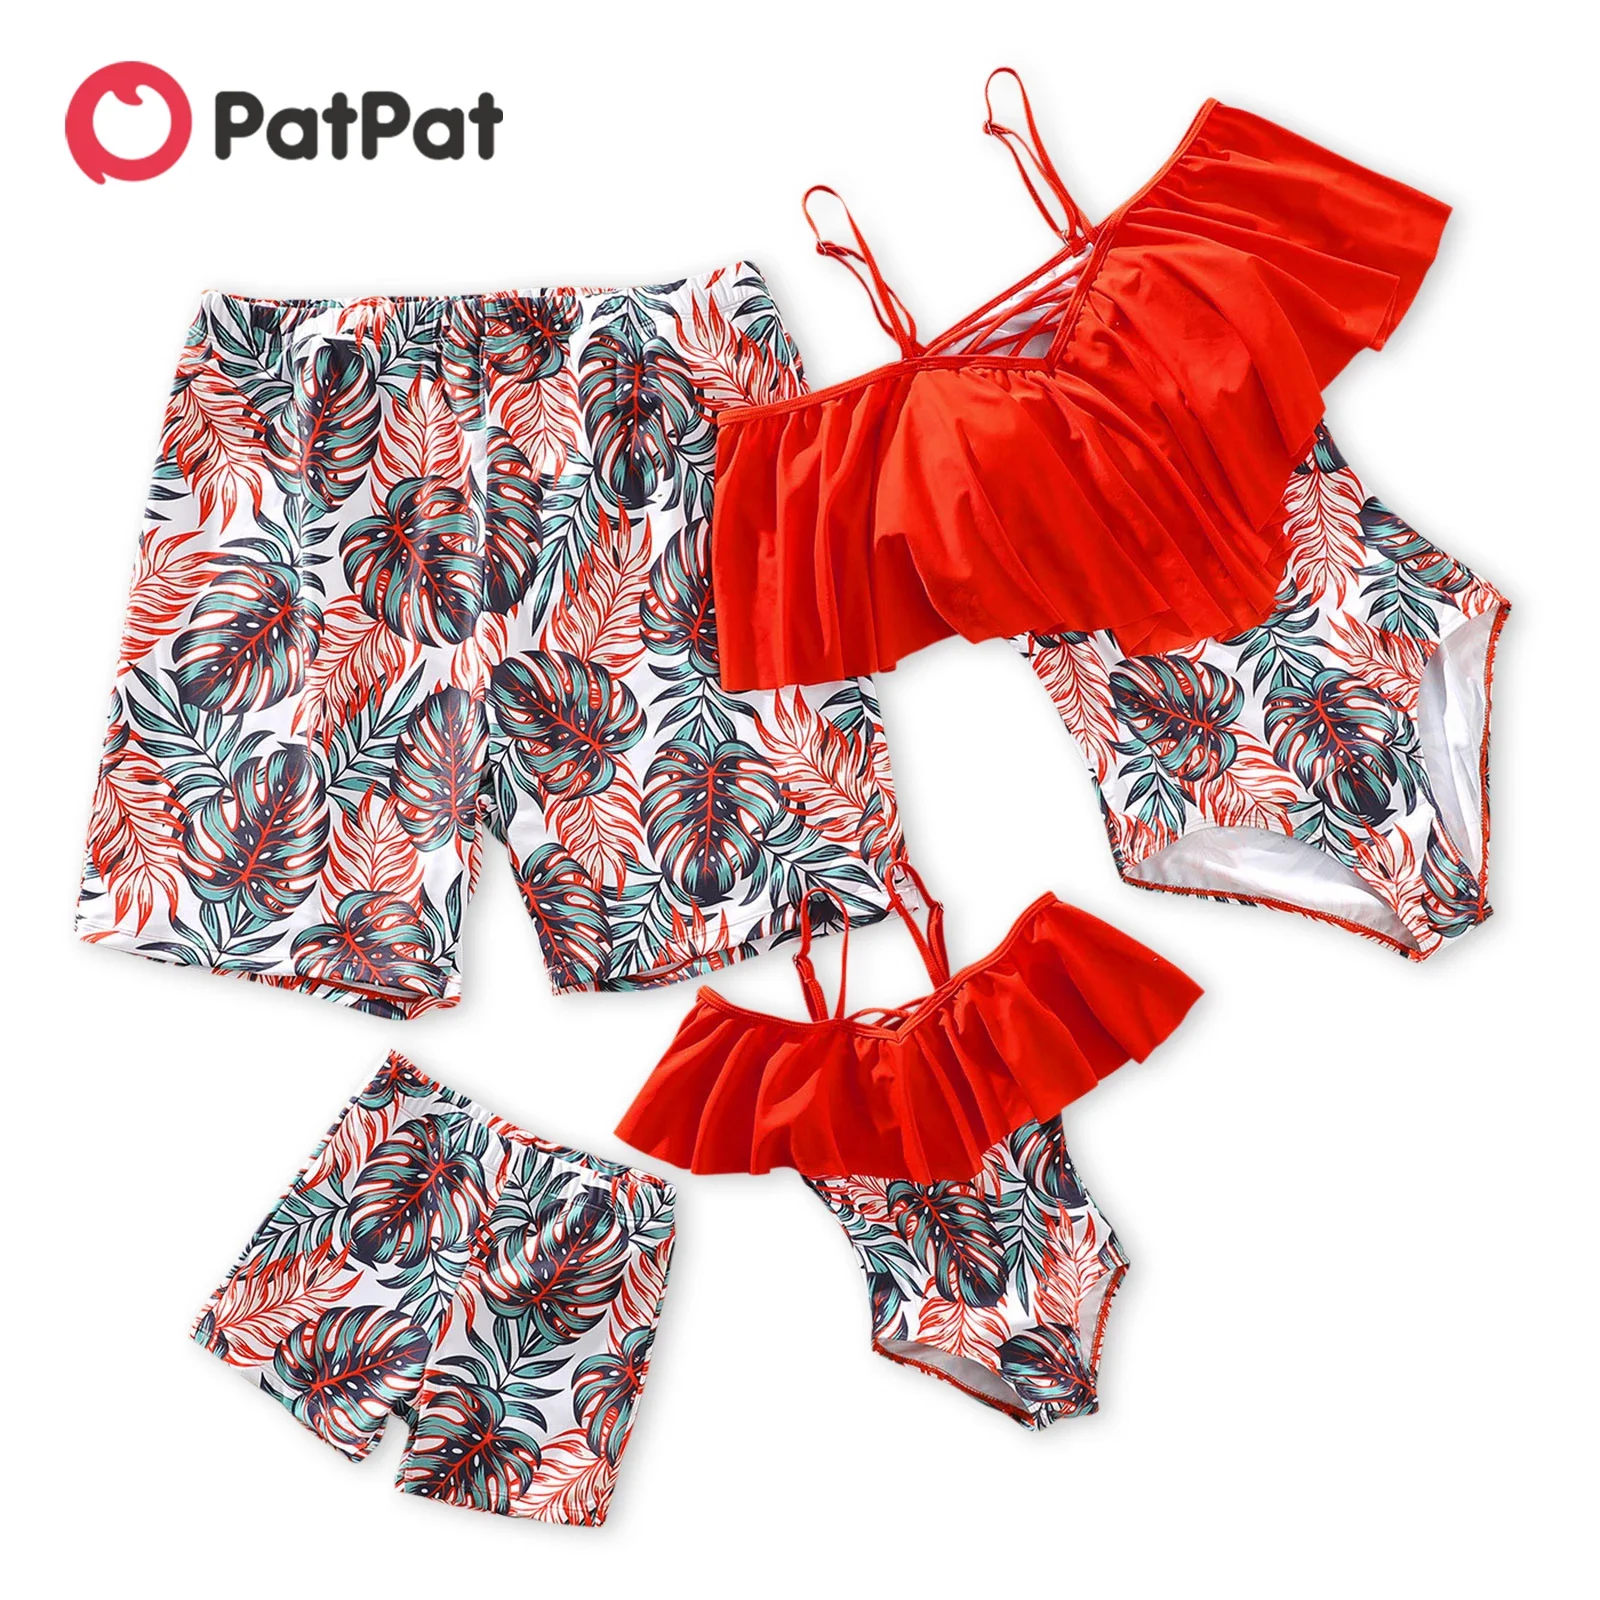 PatPat Family Matching Allover Tropical Plants Print Swim Trunks Shorts and Spaghetti Strap Ruffle One-Piece Swimsuit